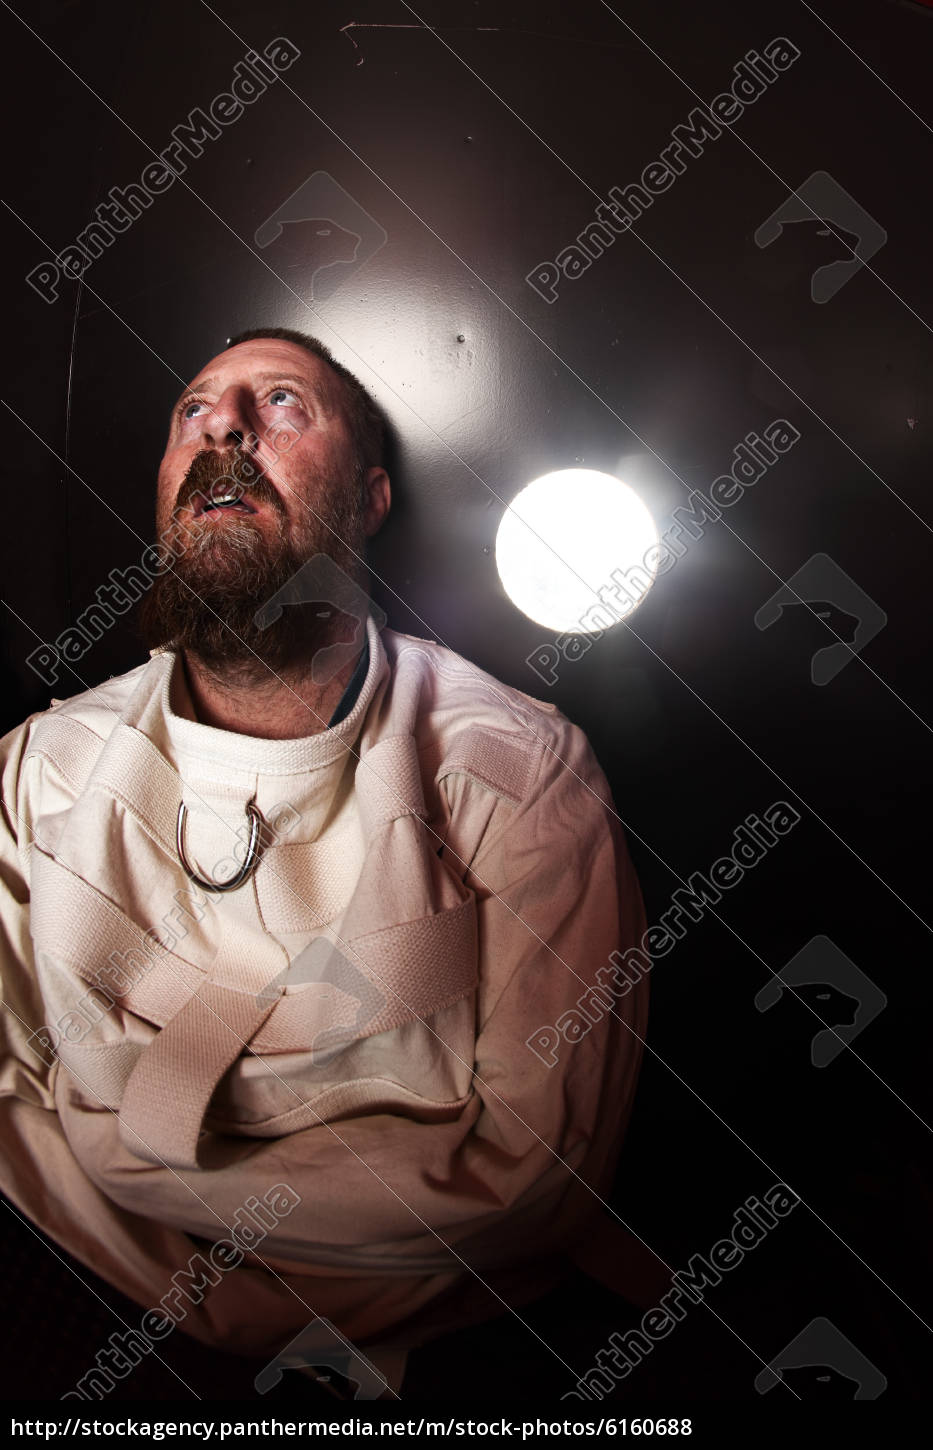 Crazy Person In A Straitjacket Royalty Free Photo 6160688 Panthermedia Stock Agency